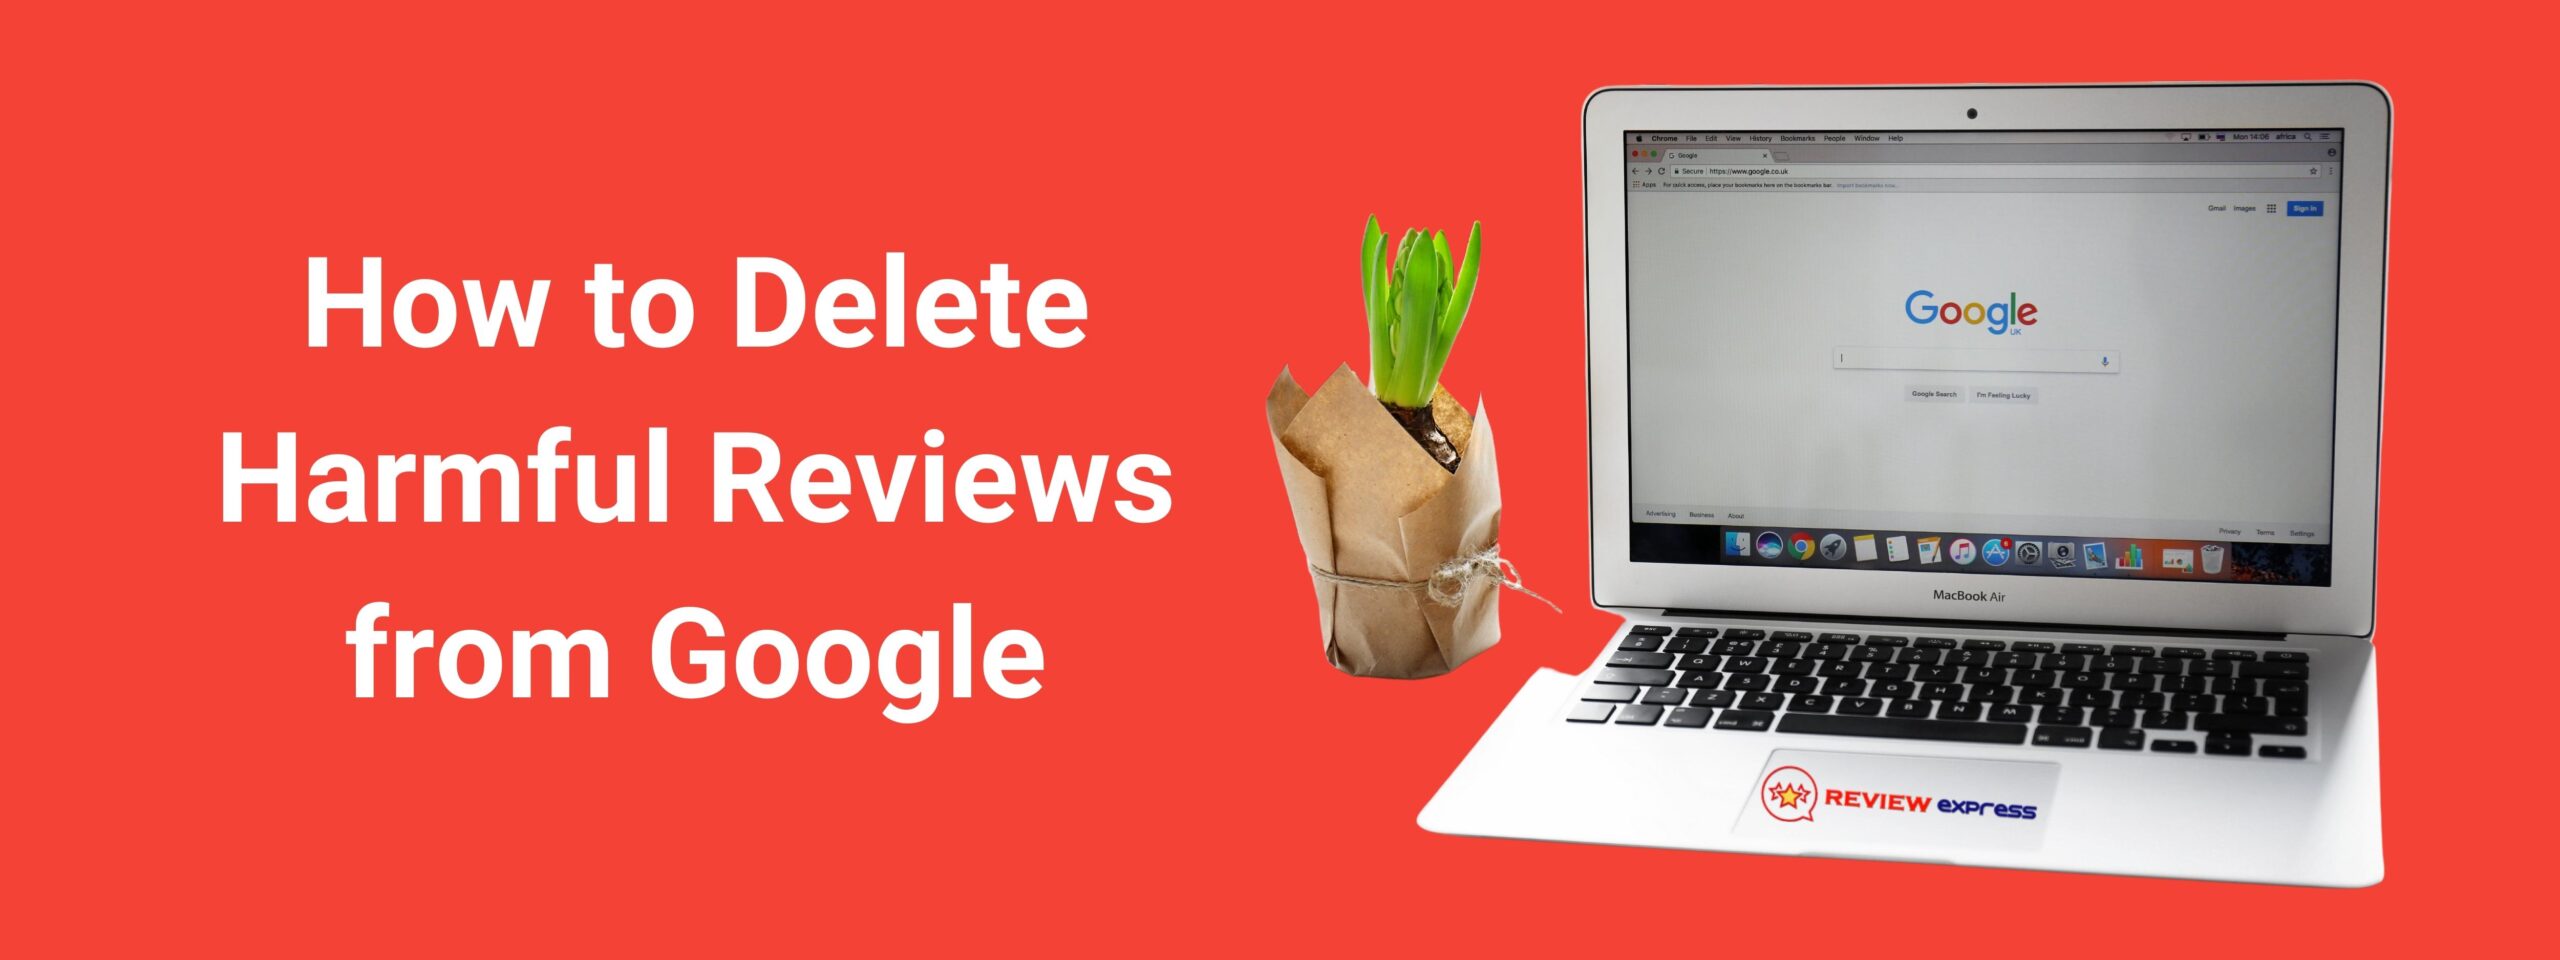 How to Delete Harmful Reviews from Google